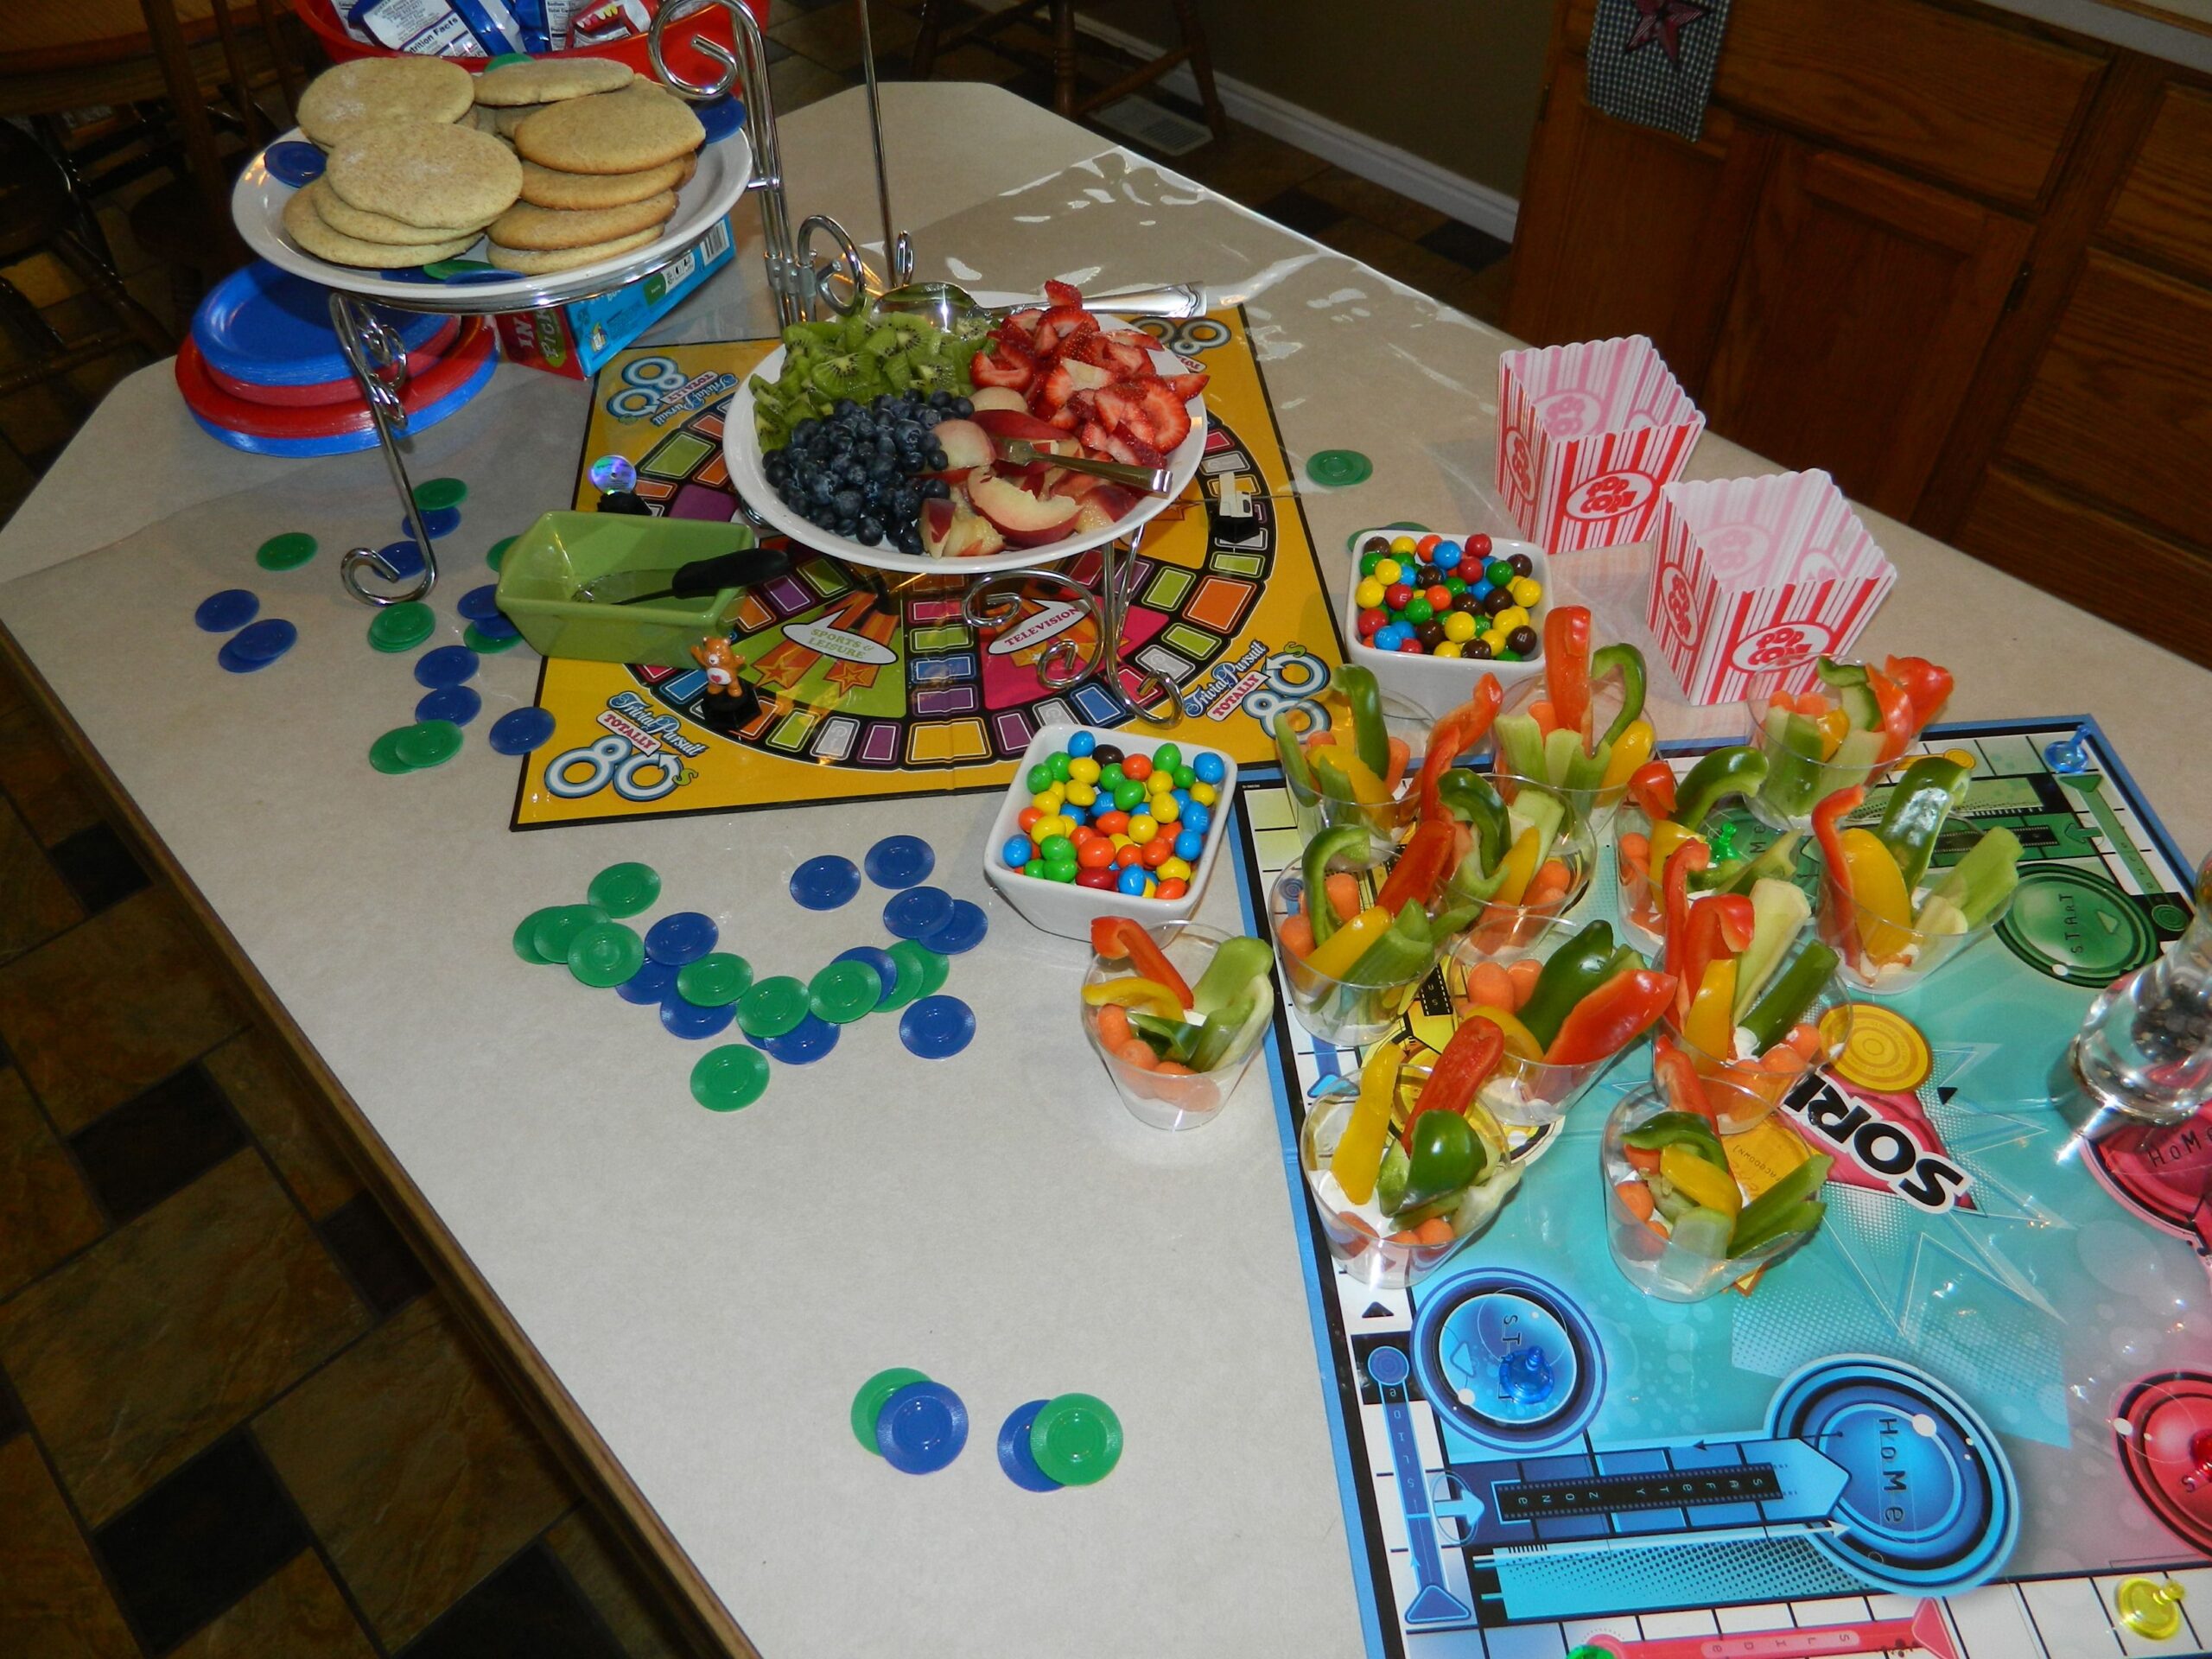 Birthday-themed board game with party decorations